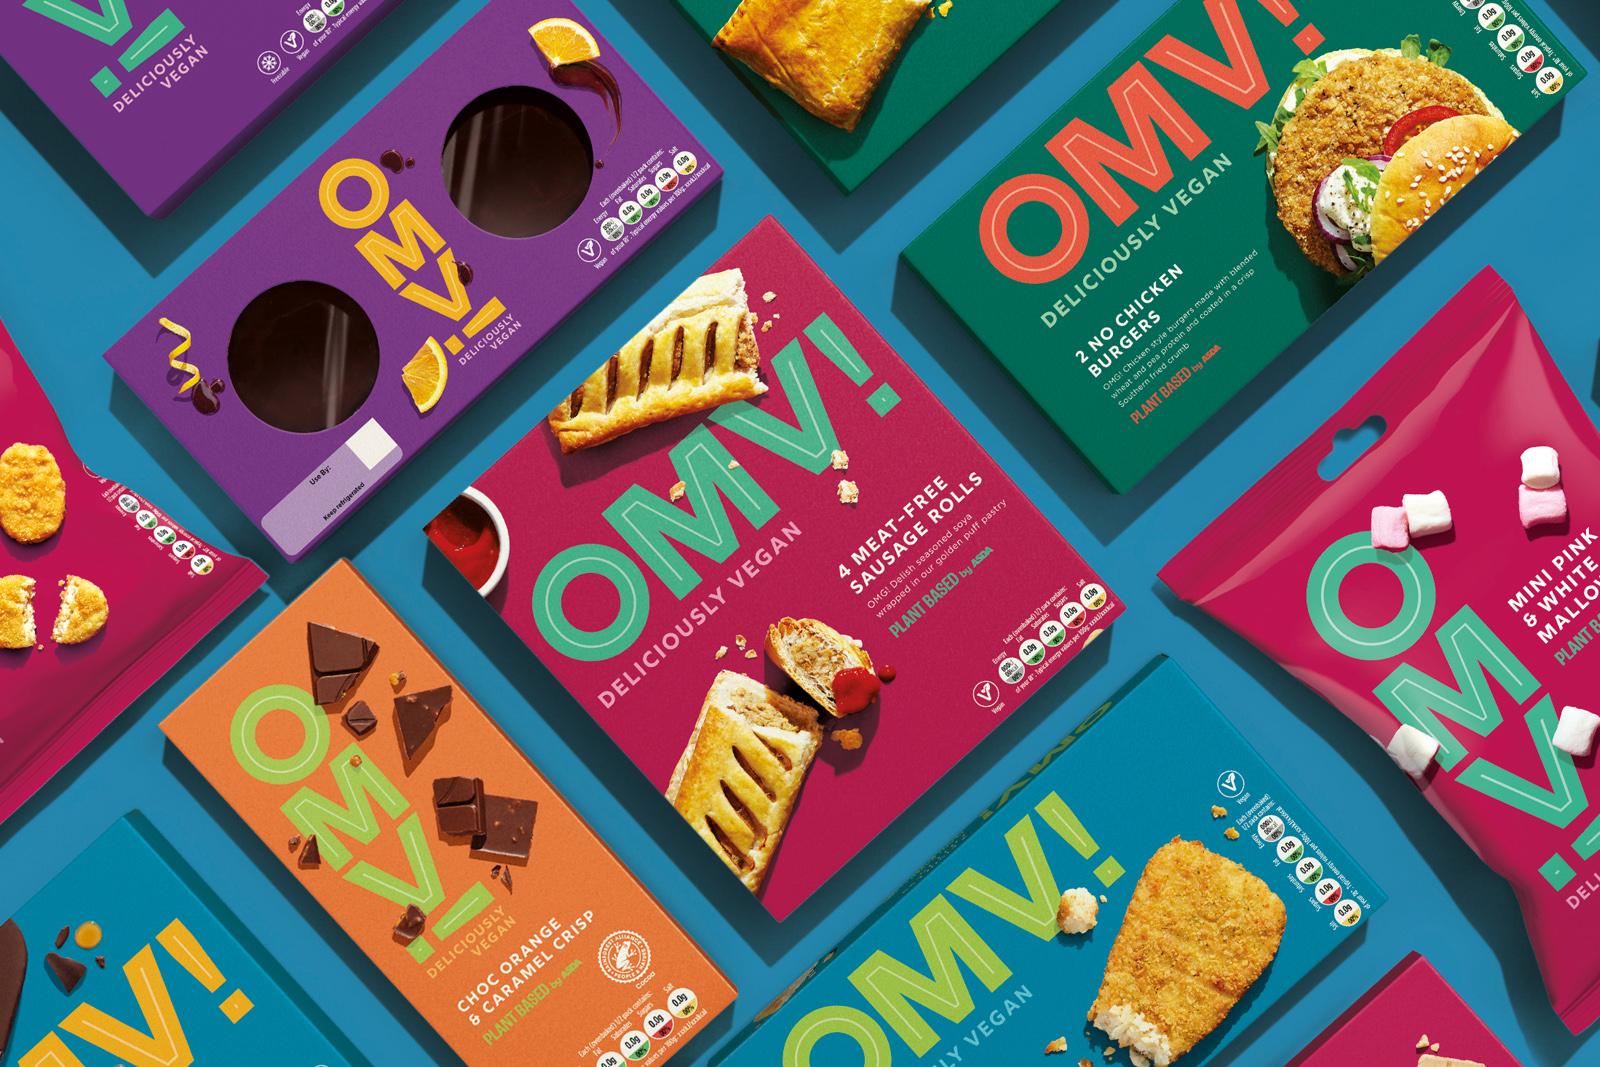 OurCreative Shake Up Asda’s Vegan Brands With OMV! and Plant Based